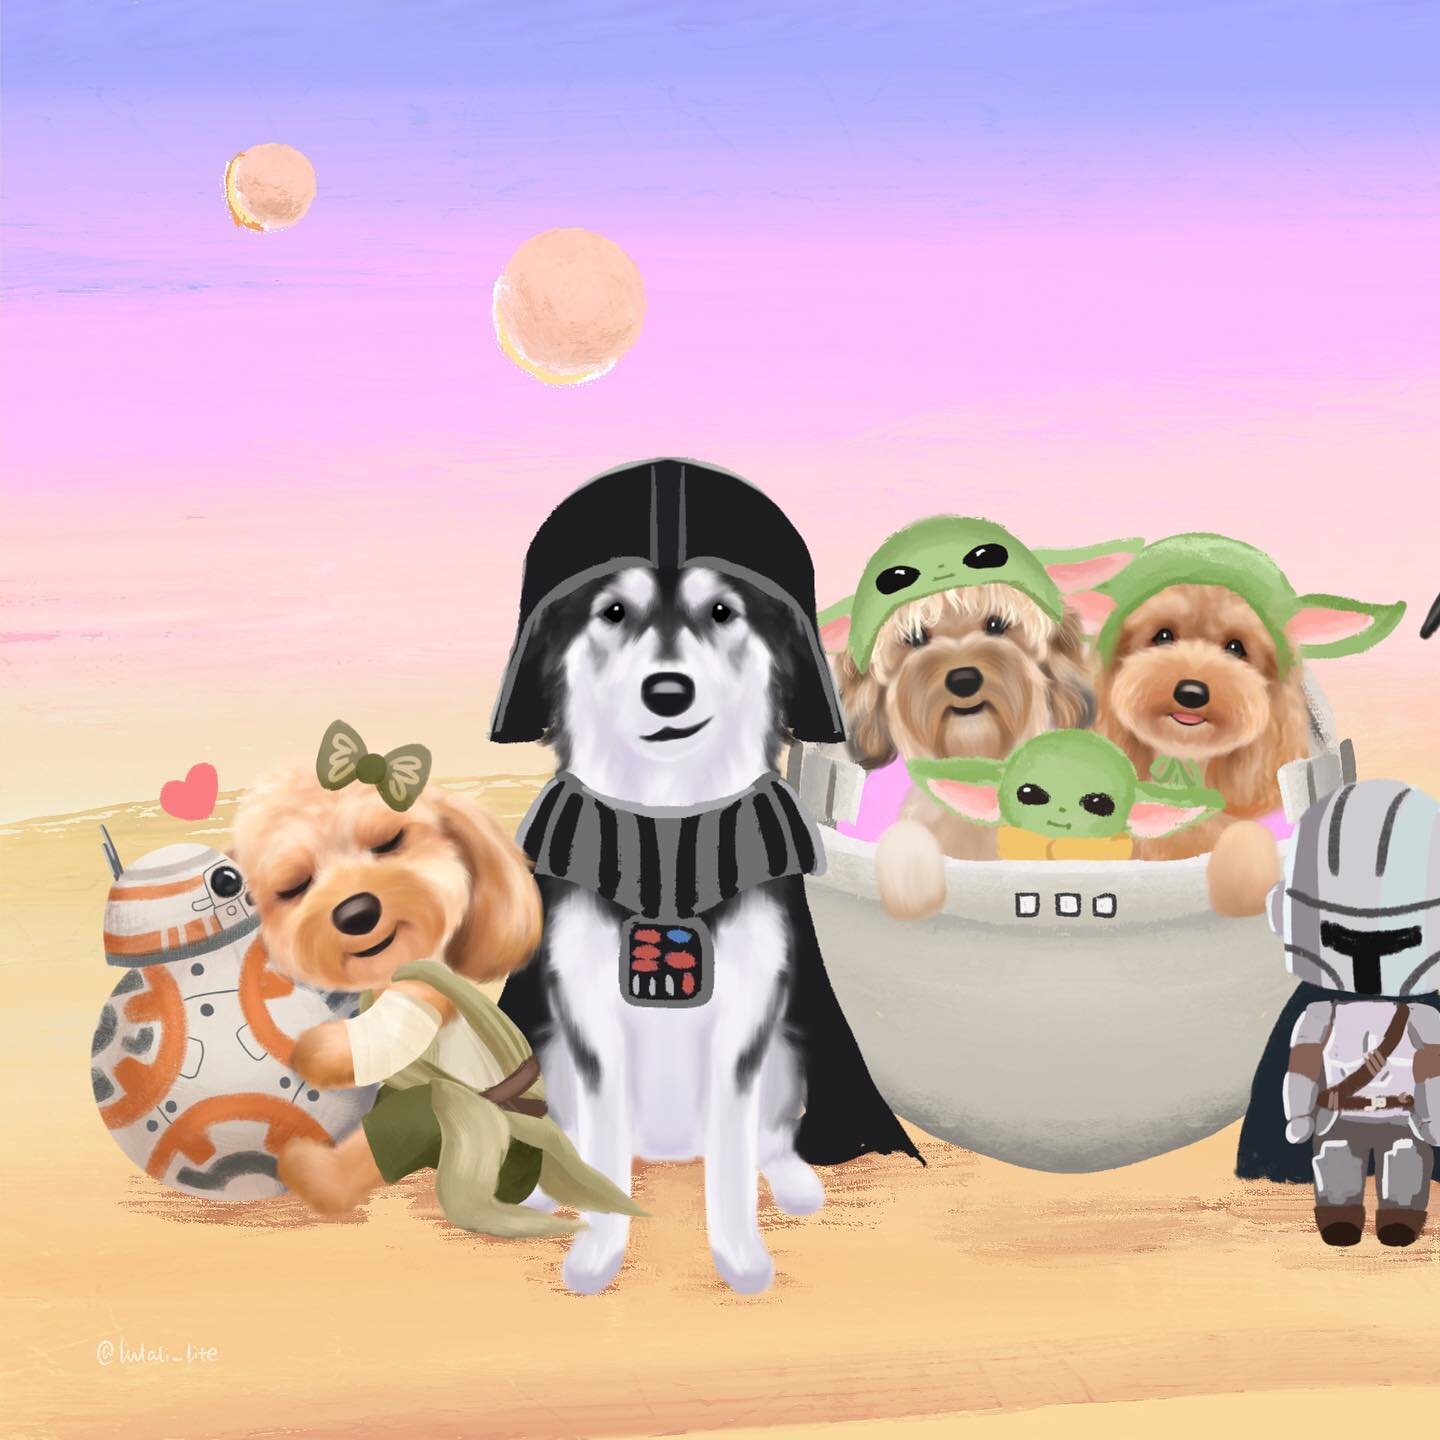 May the paws be with you! Happy #starwarsday from our cutest furiends in a galaxy far, far away 🛸